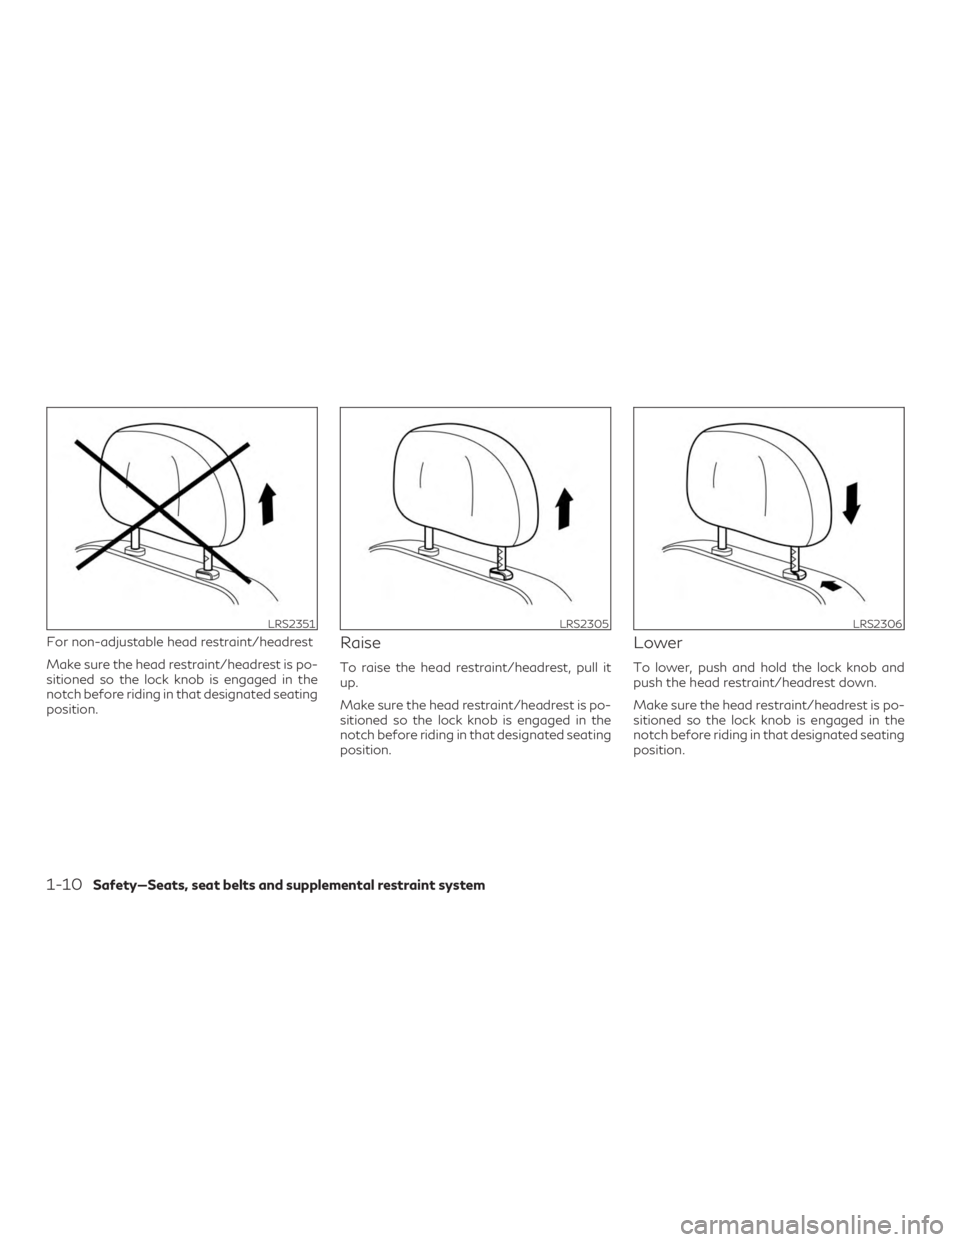 INFINITI QX50 2020  Owners Manual For non-adjustable head restraint/headrest
Make sure the head restraint/headrest is po-
sitioned so the lock knob is engaged in the
notch before riding in that designated seating
position.Raise
To rai